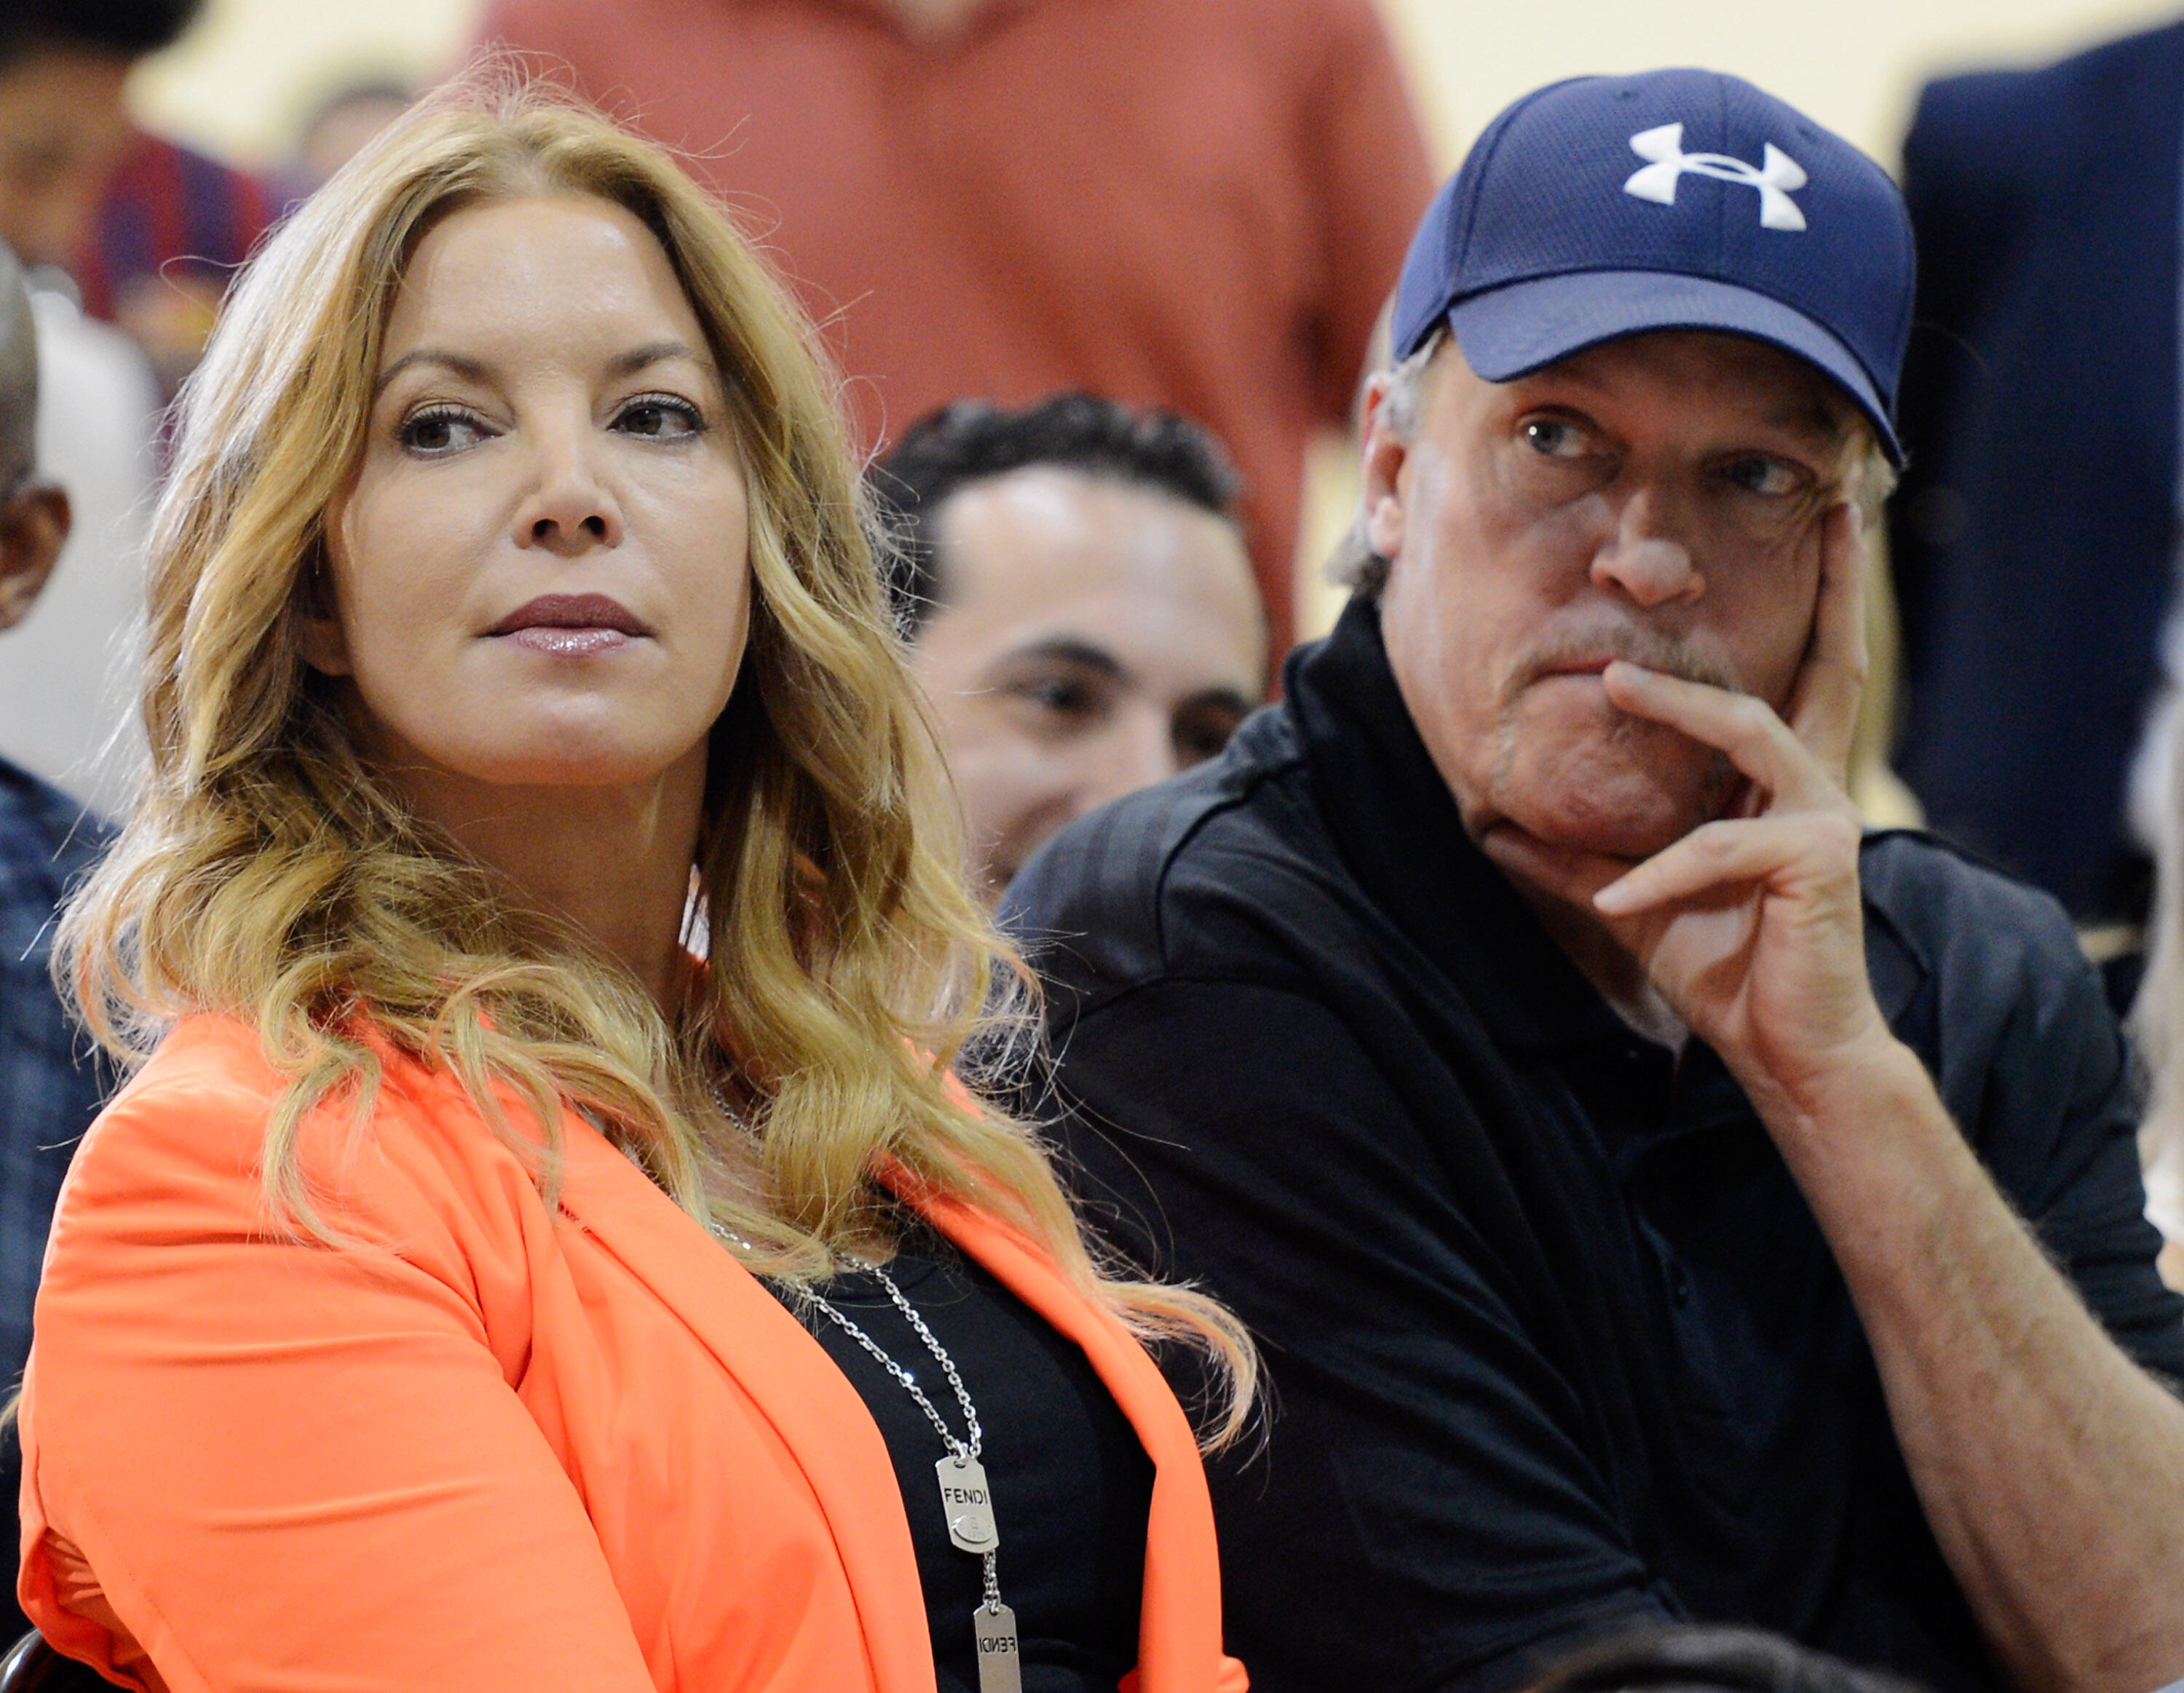 EL SEGUNDO, CA - AUGUST 10:  Jim Buss and his sister Jeanie Buss of the Los Angeles Lakers attend a news conference where Dwight Howard was introduced as the newest member of the team at the Toyota Sports Center on August 10, 2012 in El Segundo, Californi